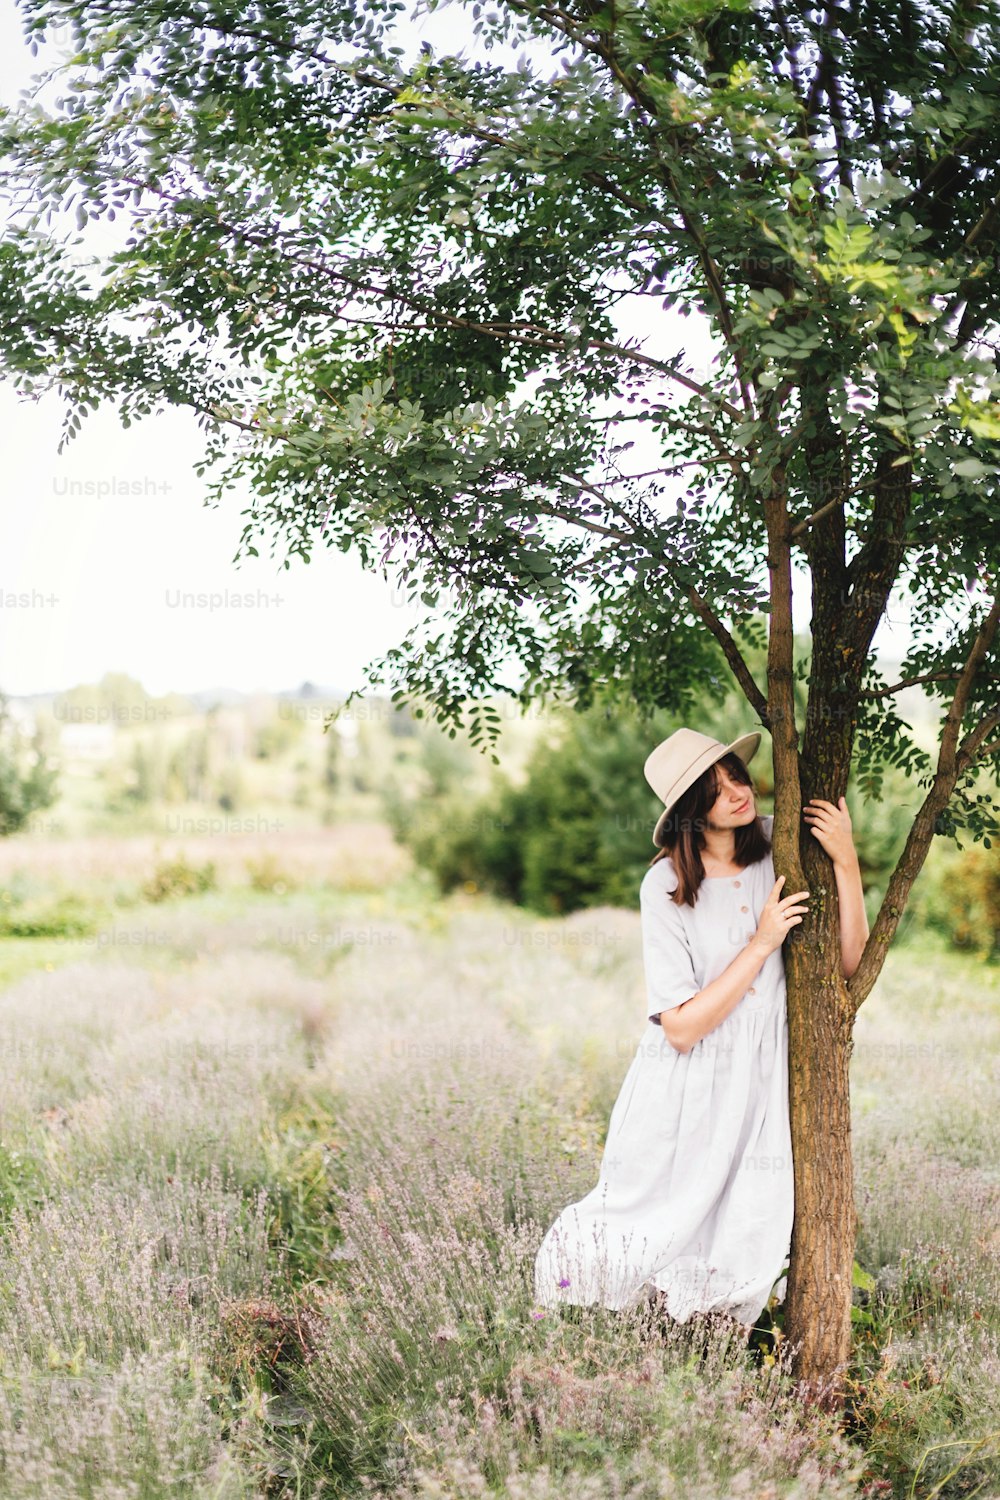 Stylish hipster girl in linen dress and hat relaxing in lavender field near tree. Happy bohemian woman enjoying summer vacation in mountains. Atmospheric calm rural moment. Space for text